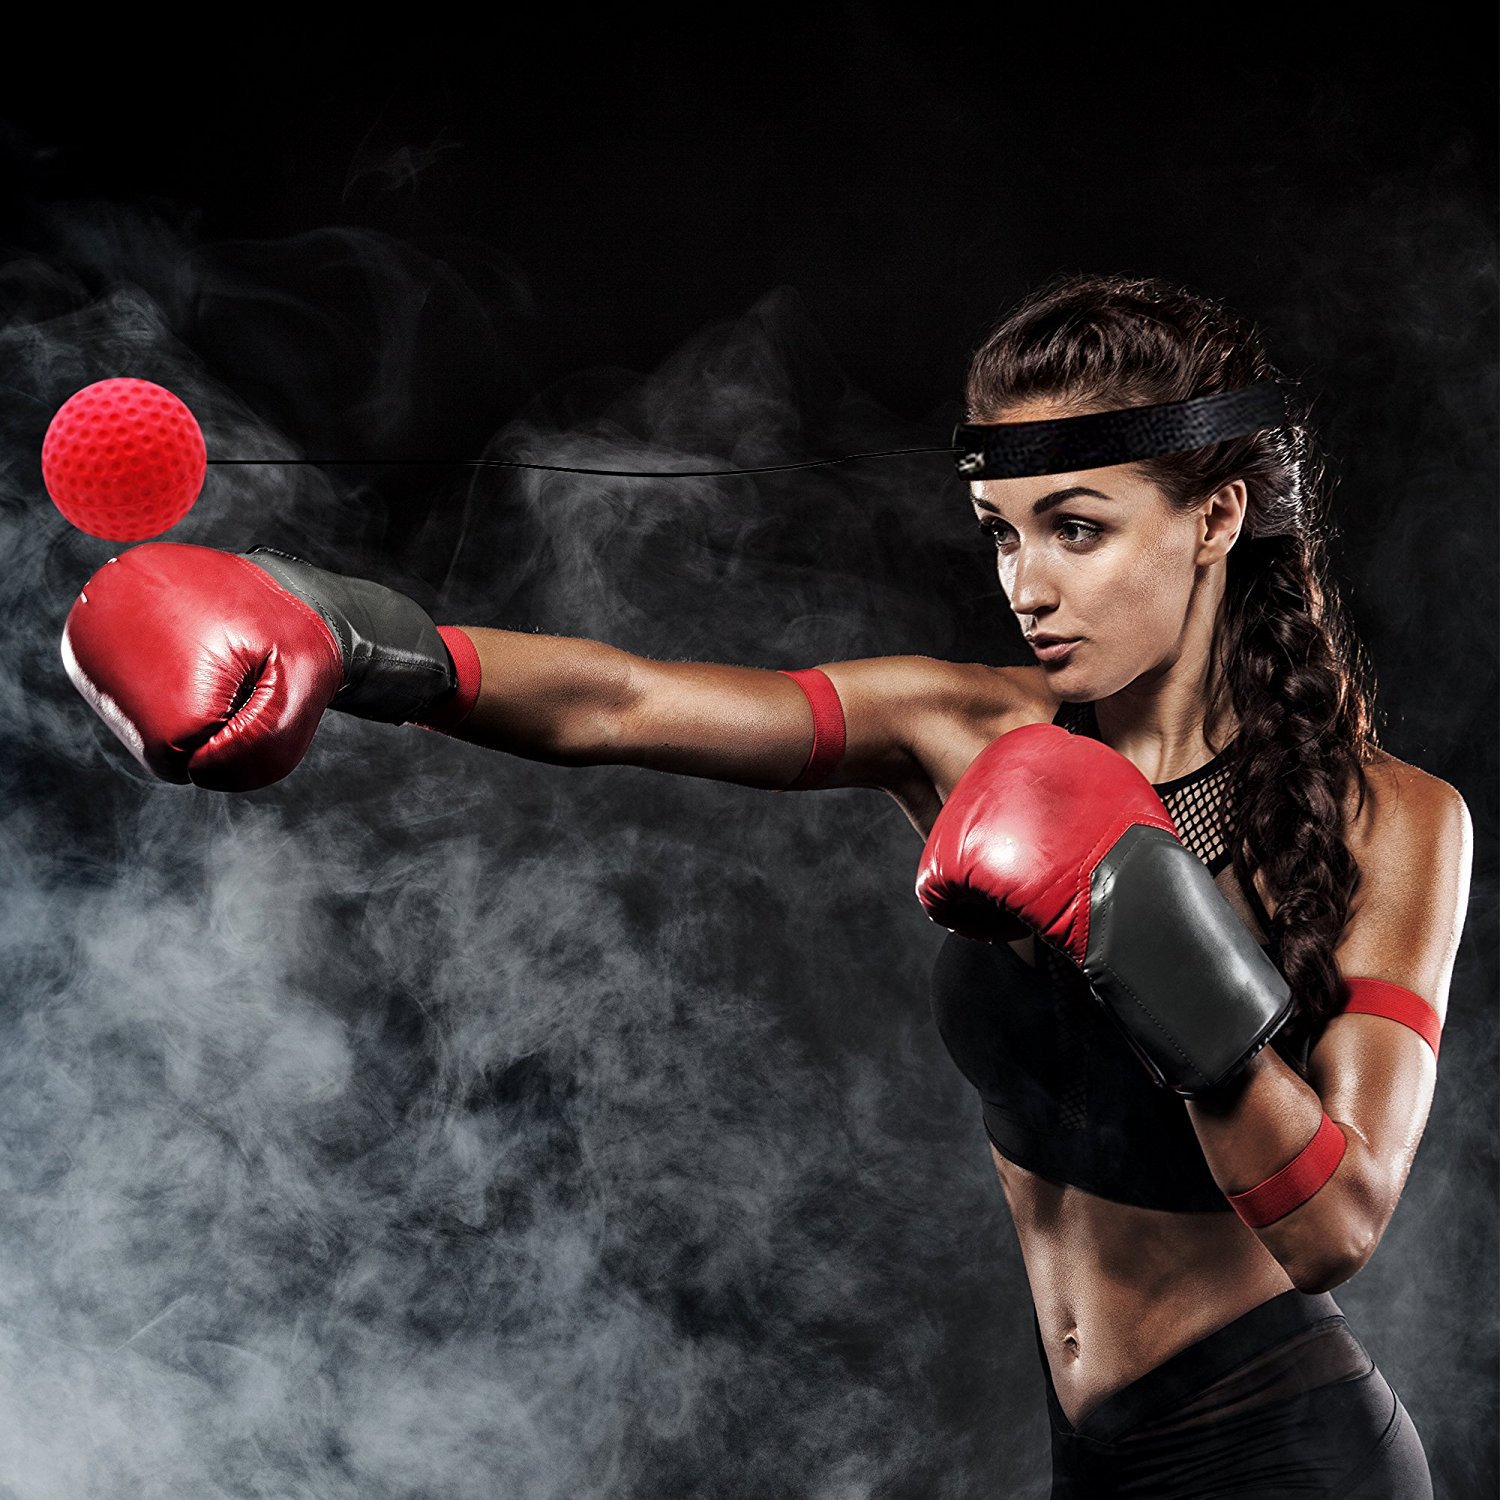 3840x21602019 boxing, girl, black background 3840x21602019 Resolution ...